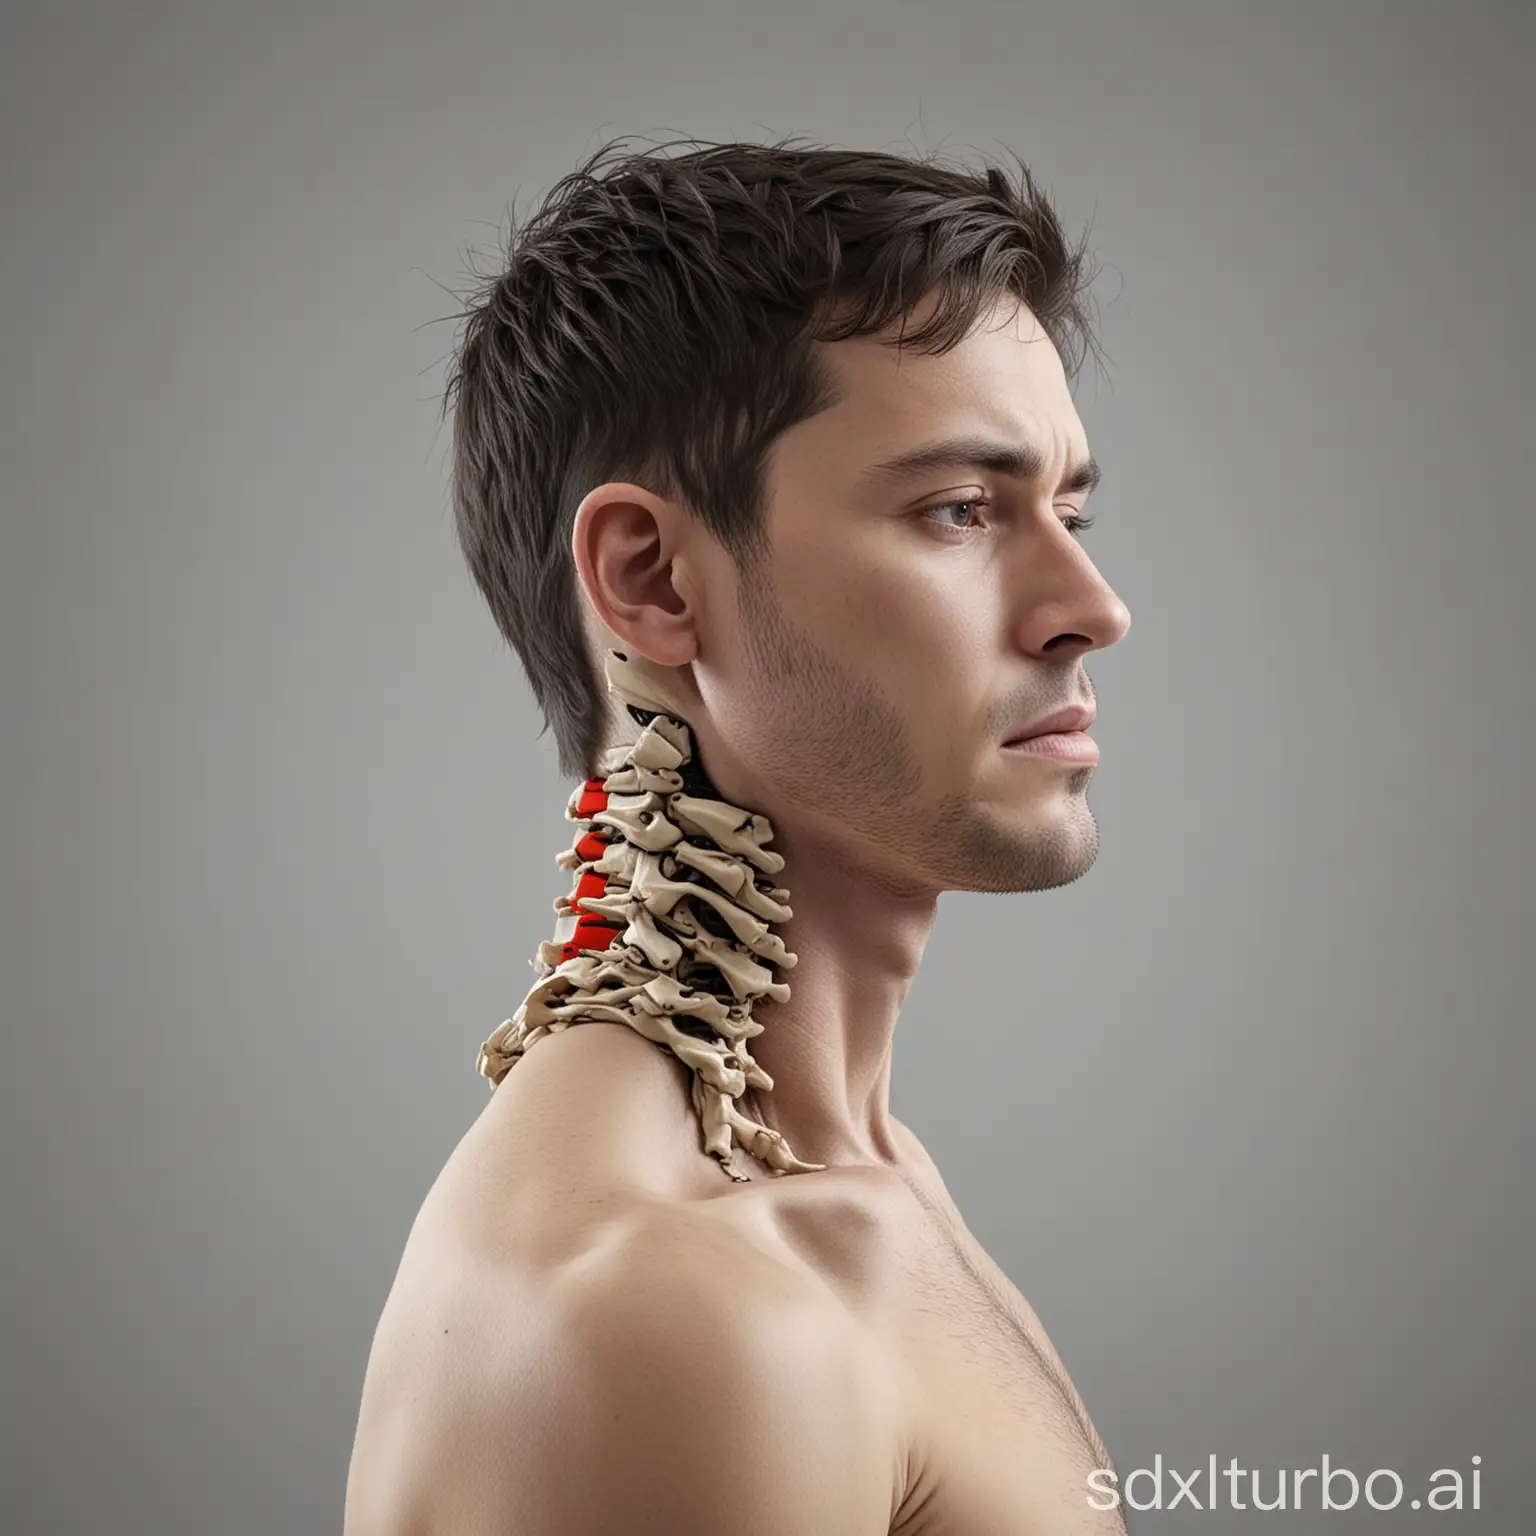 Poor-Neck-Posture-Side-View-Realistic-Isolated-Image-in-8K